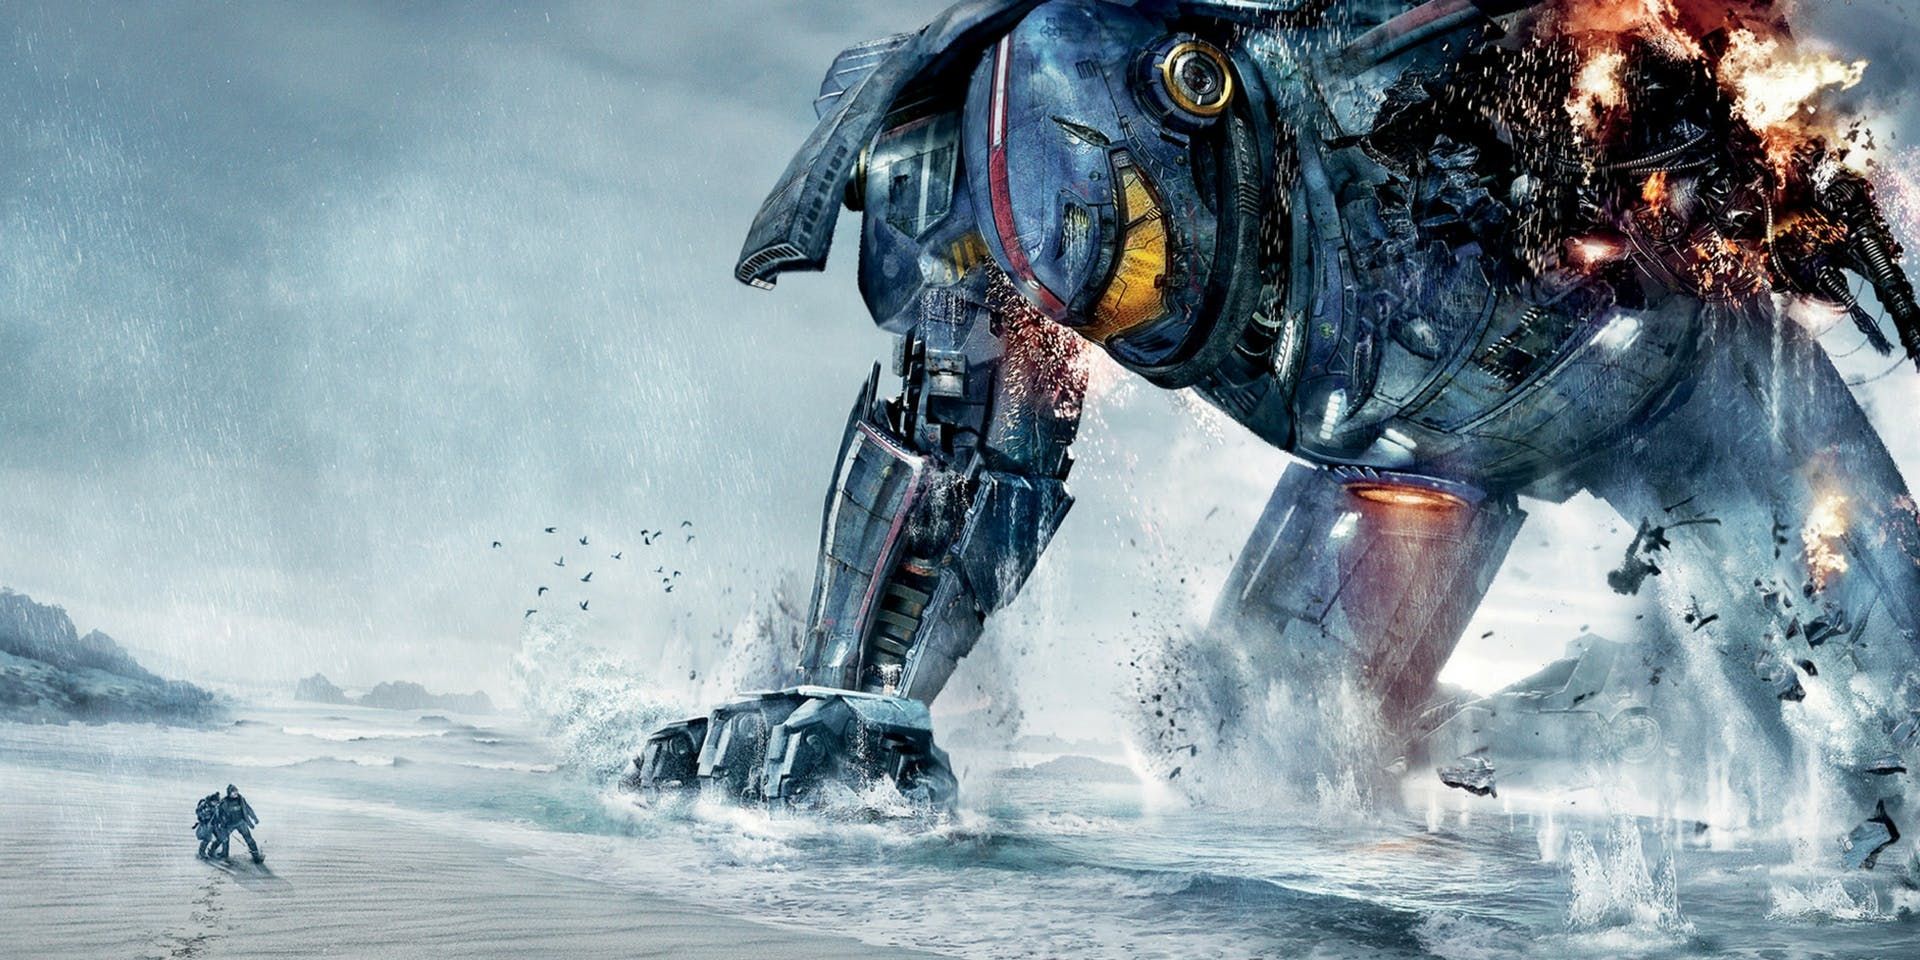 Gipsy Danger on the beach in Pacific Rim